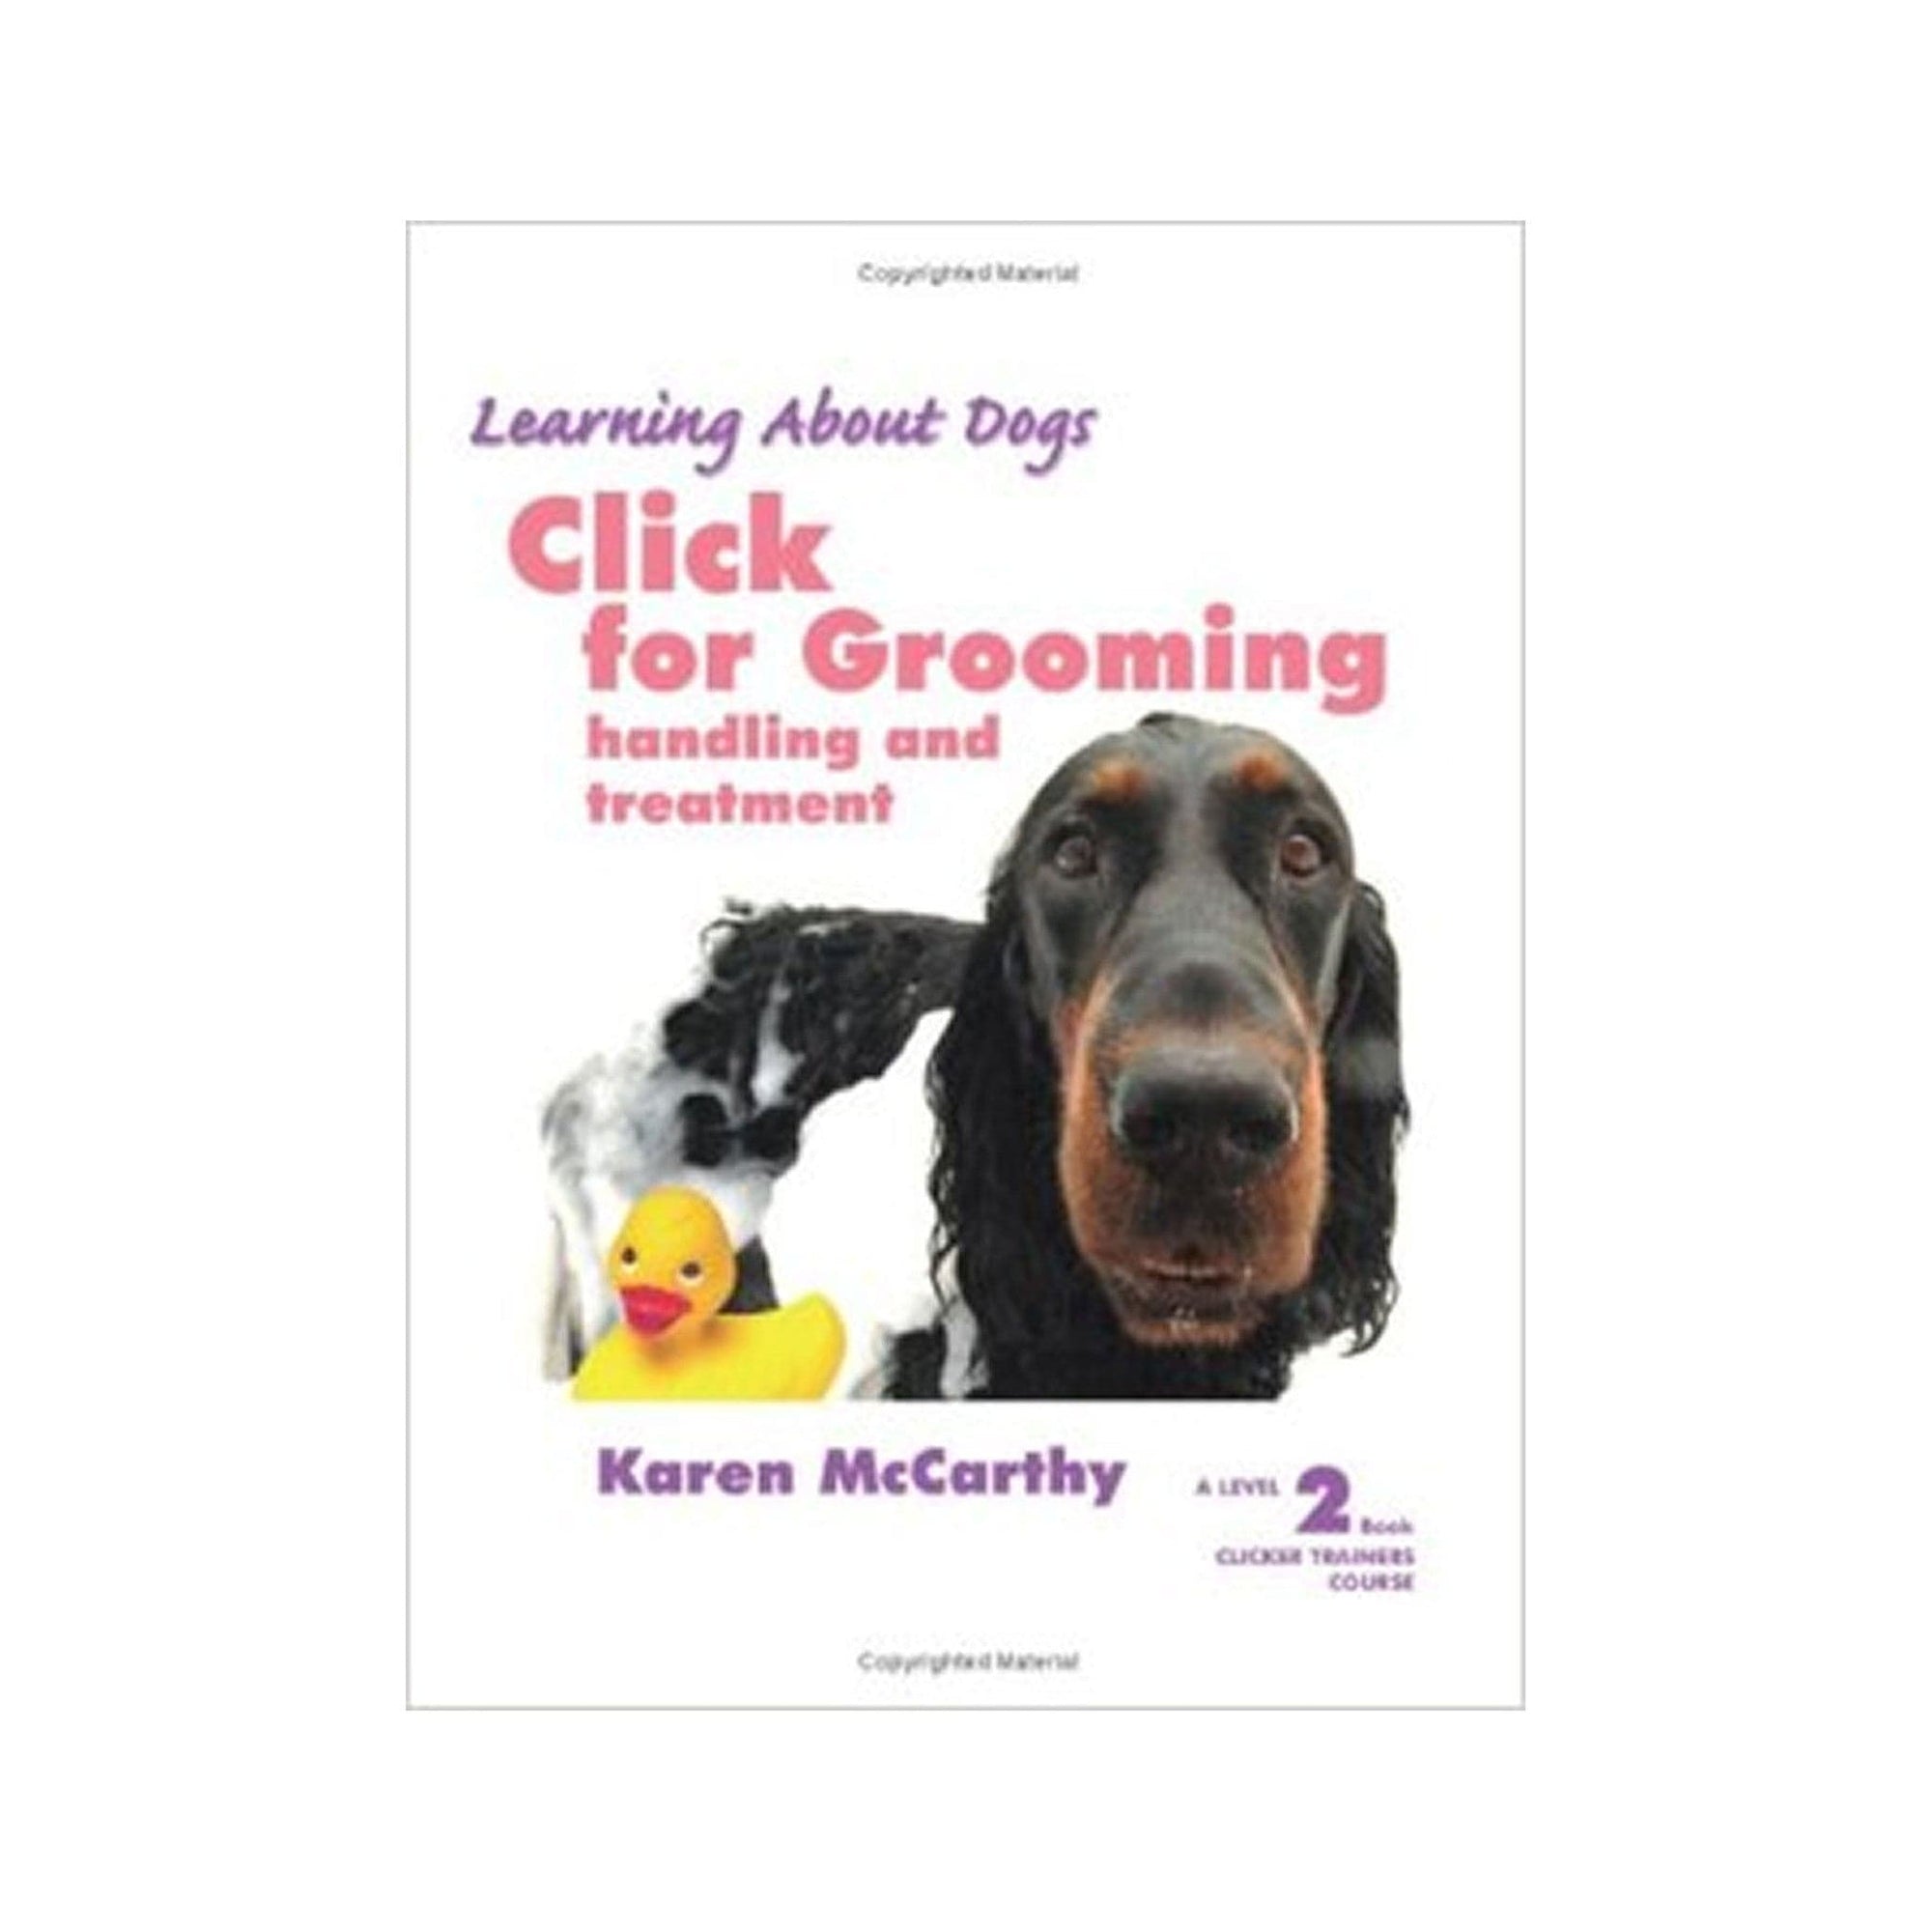 Click for Grooming: Handling and Treatment by Karen McCarthy